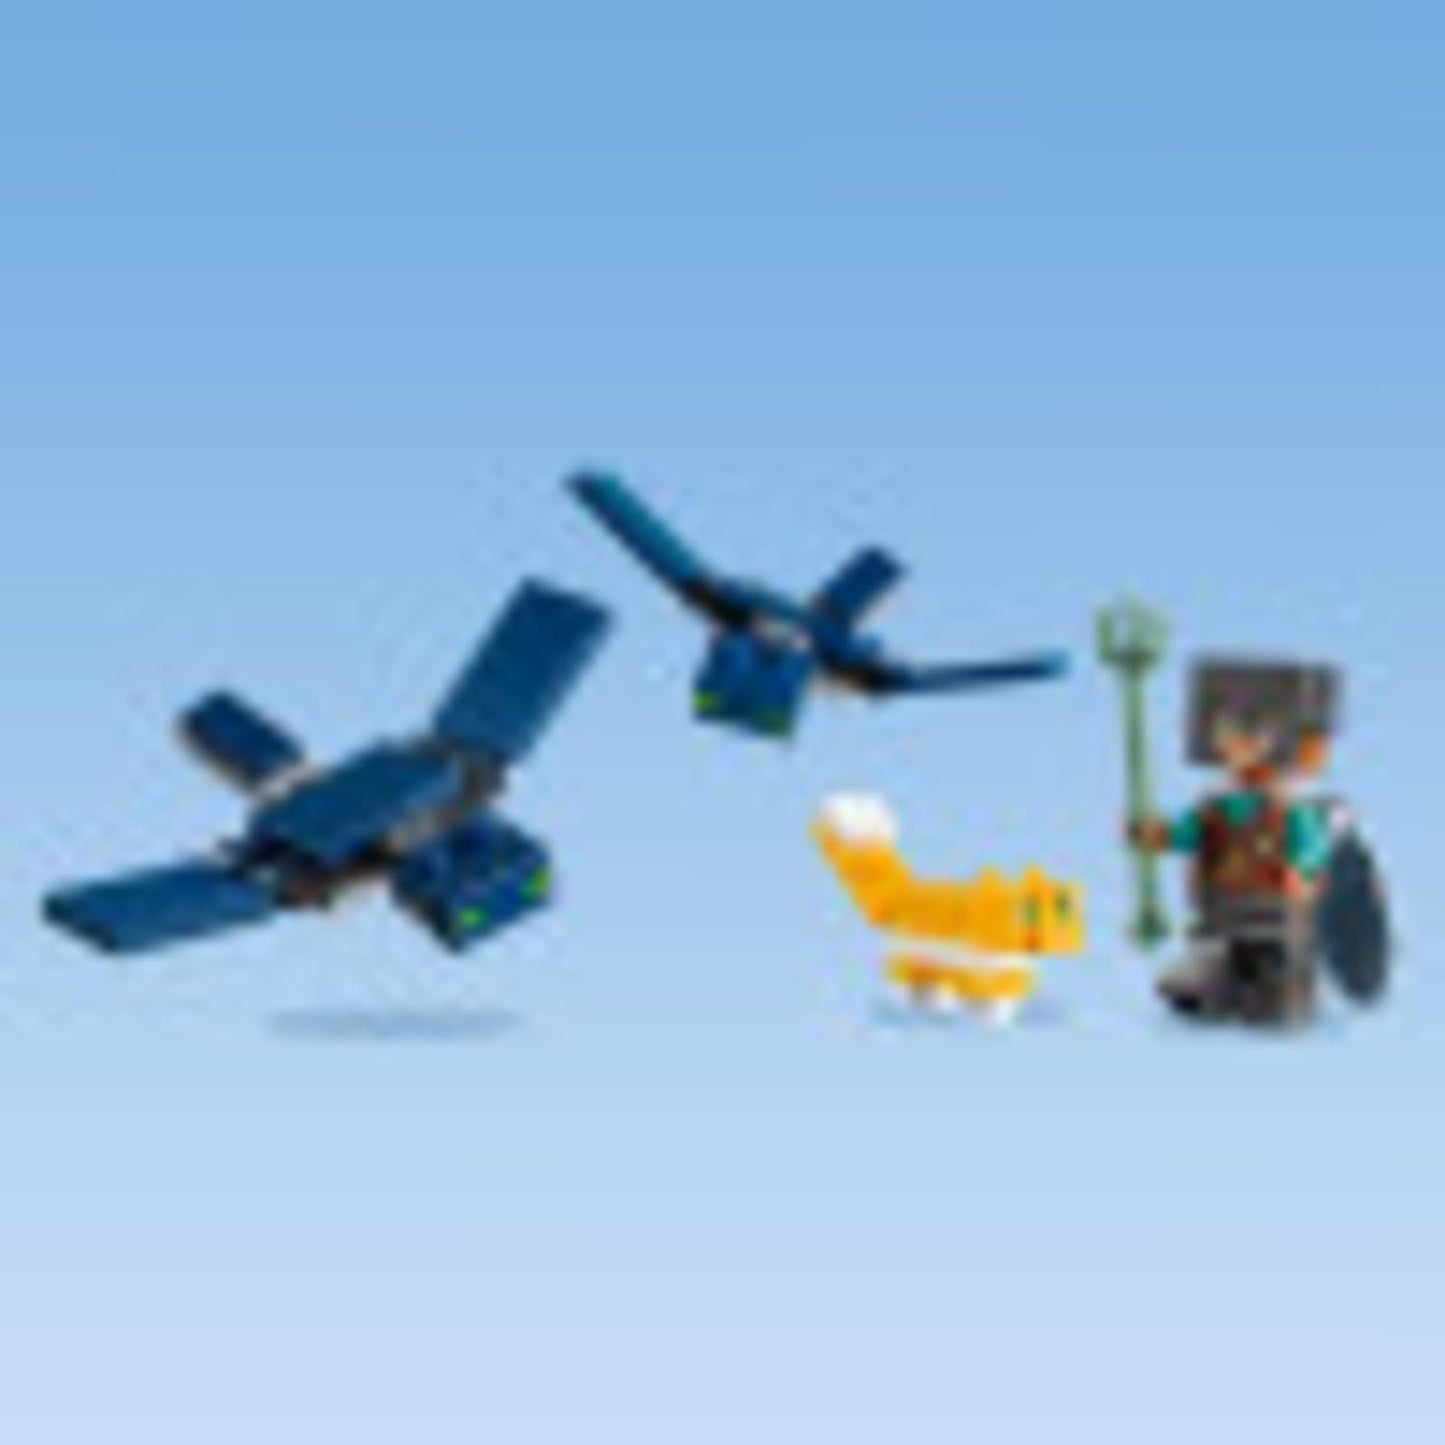 LEGO Minecraft The Sky Tower 21173 Fun Floating Islands Building Kit Toy with a Pilot, 2 Flying Phantoms and a Cat; New 2021 (565 Pieces)